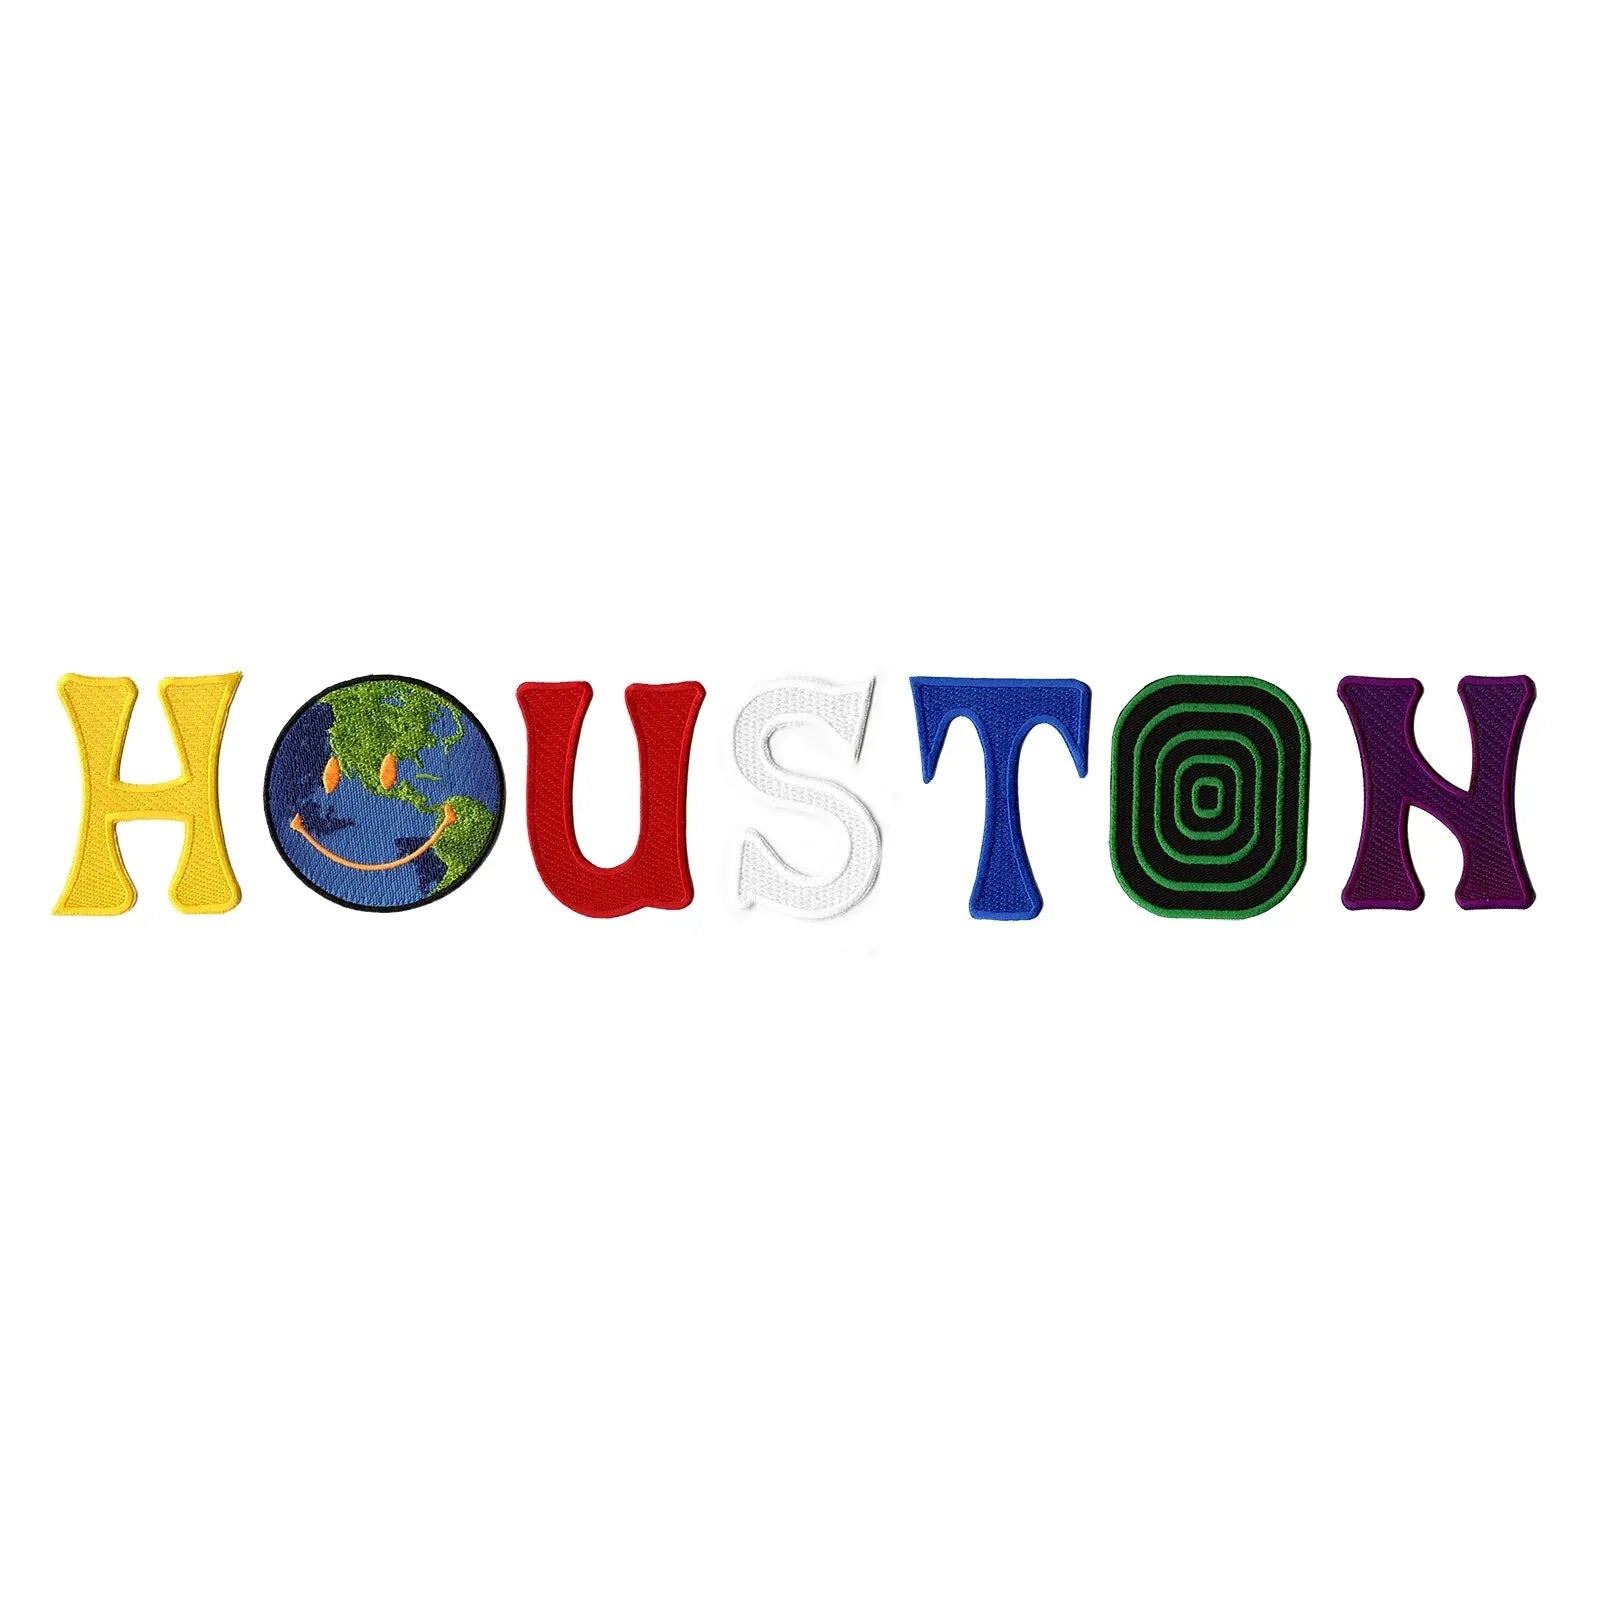 Custom Black Houston Astro World Themed Font Parody Embroidered Pullover Hoodie 